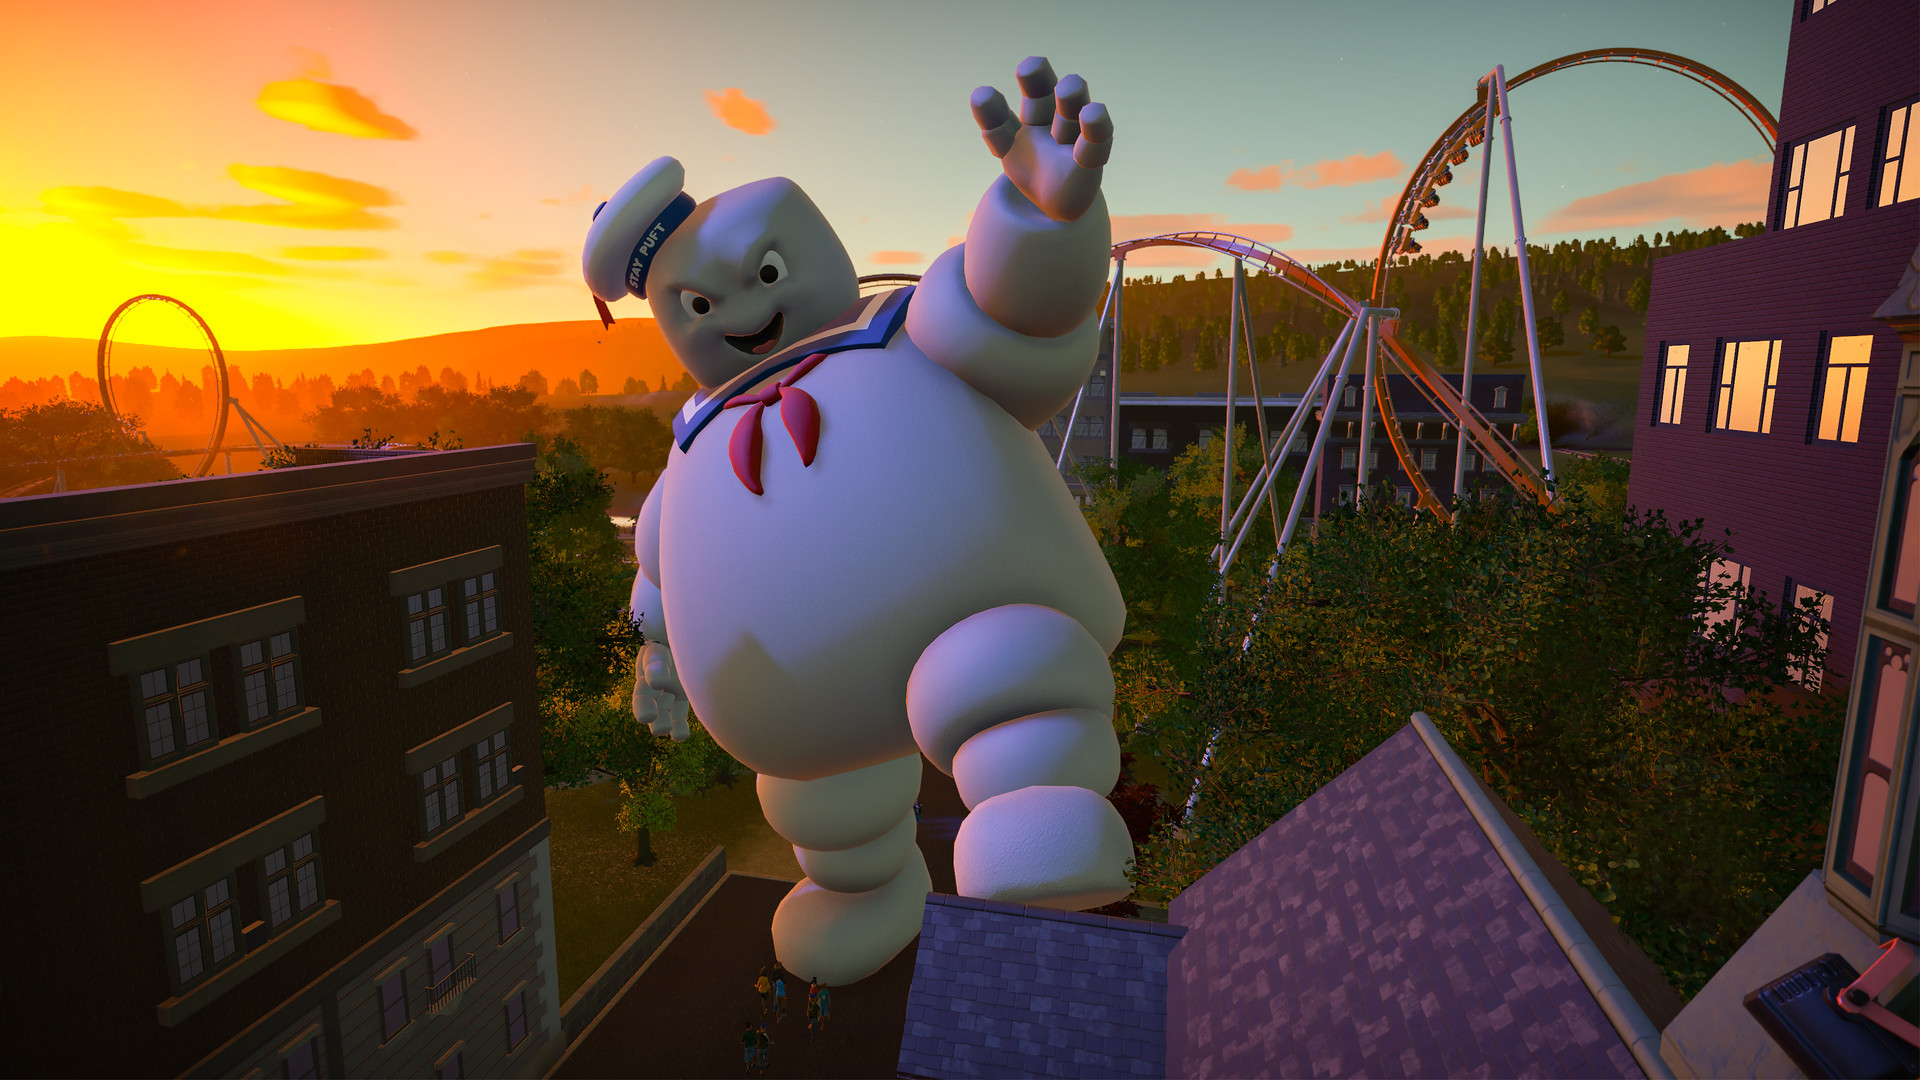 download planet coaster ghostbusters